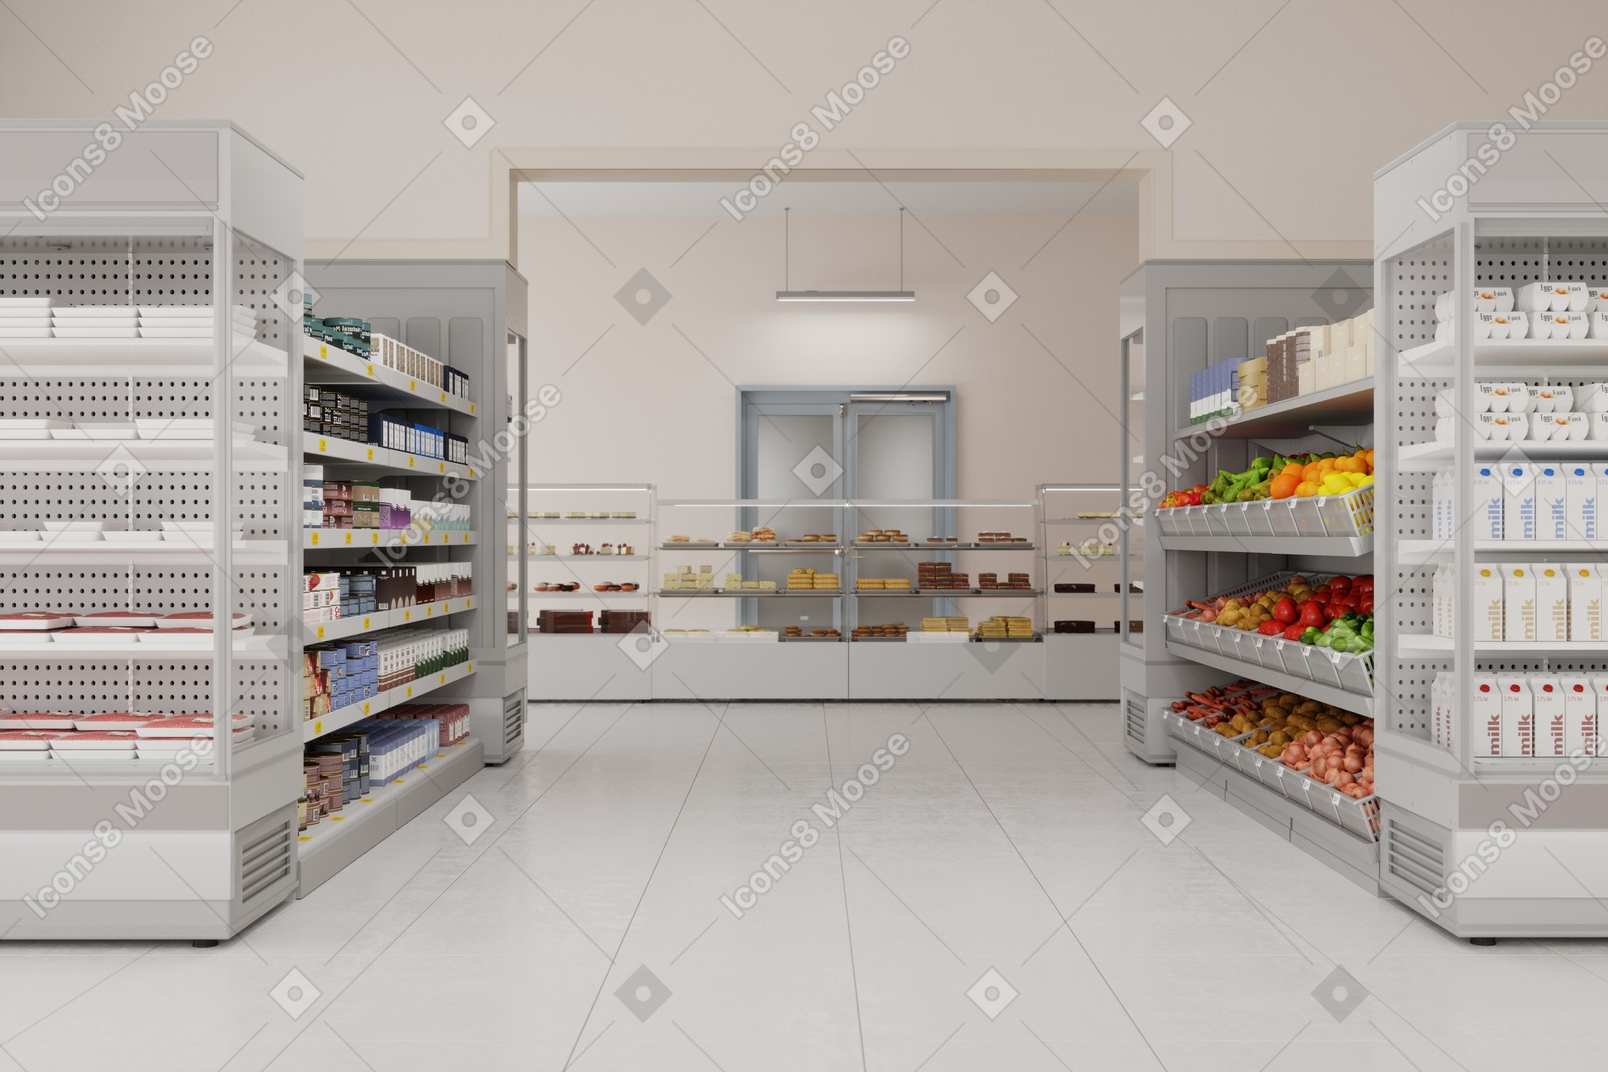 Supermarket stands filled with goods